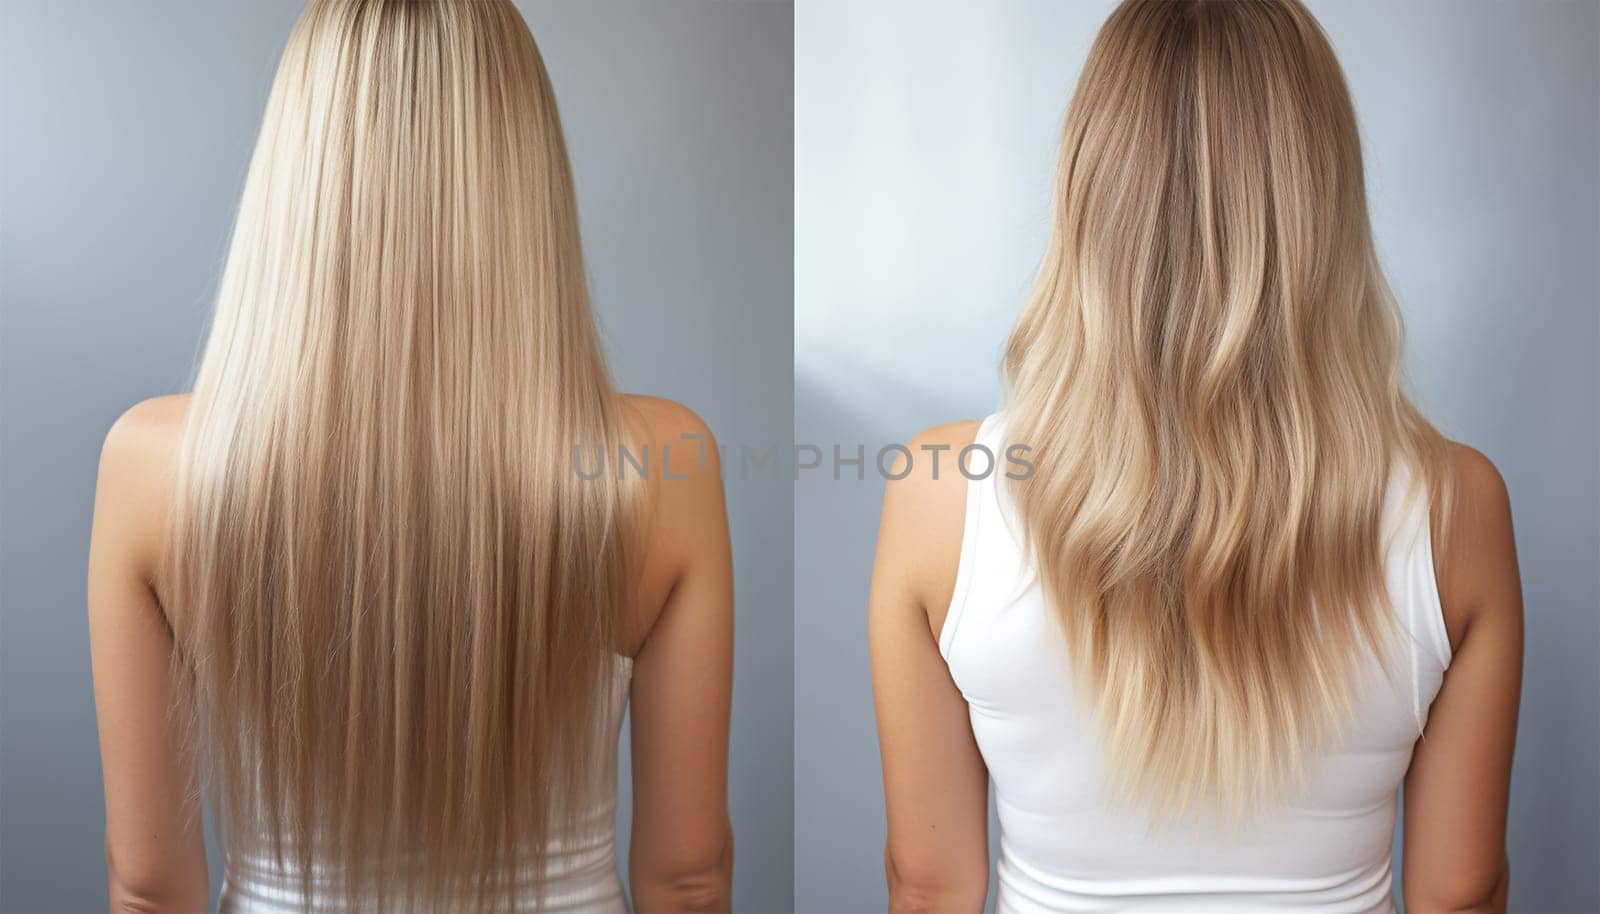 Young blonde woman before and after visiting beauty salon with hair coloring and hair cut. Hair salon. Sick, cut healthy hair care keratin woman. Before and after treatment. isolated light background. beauty